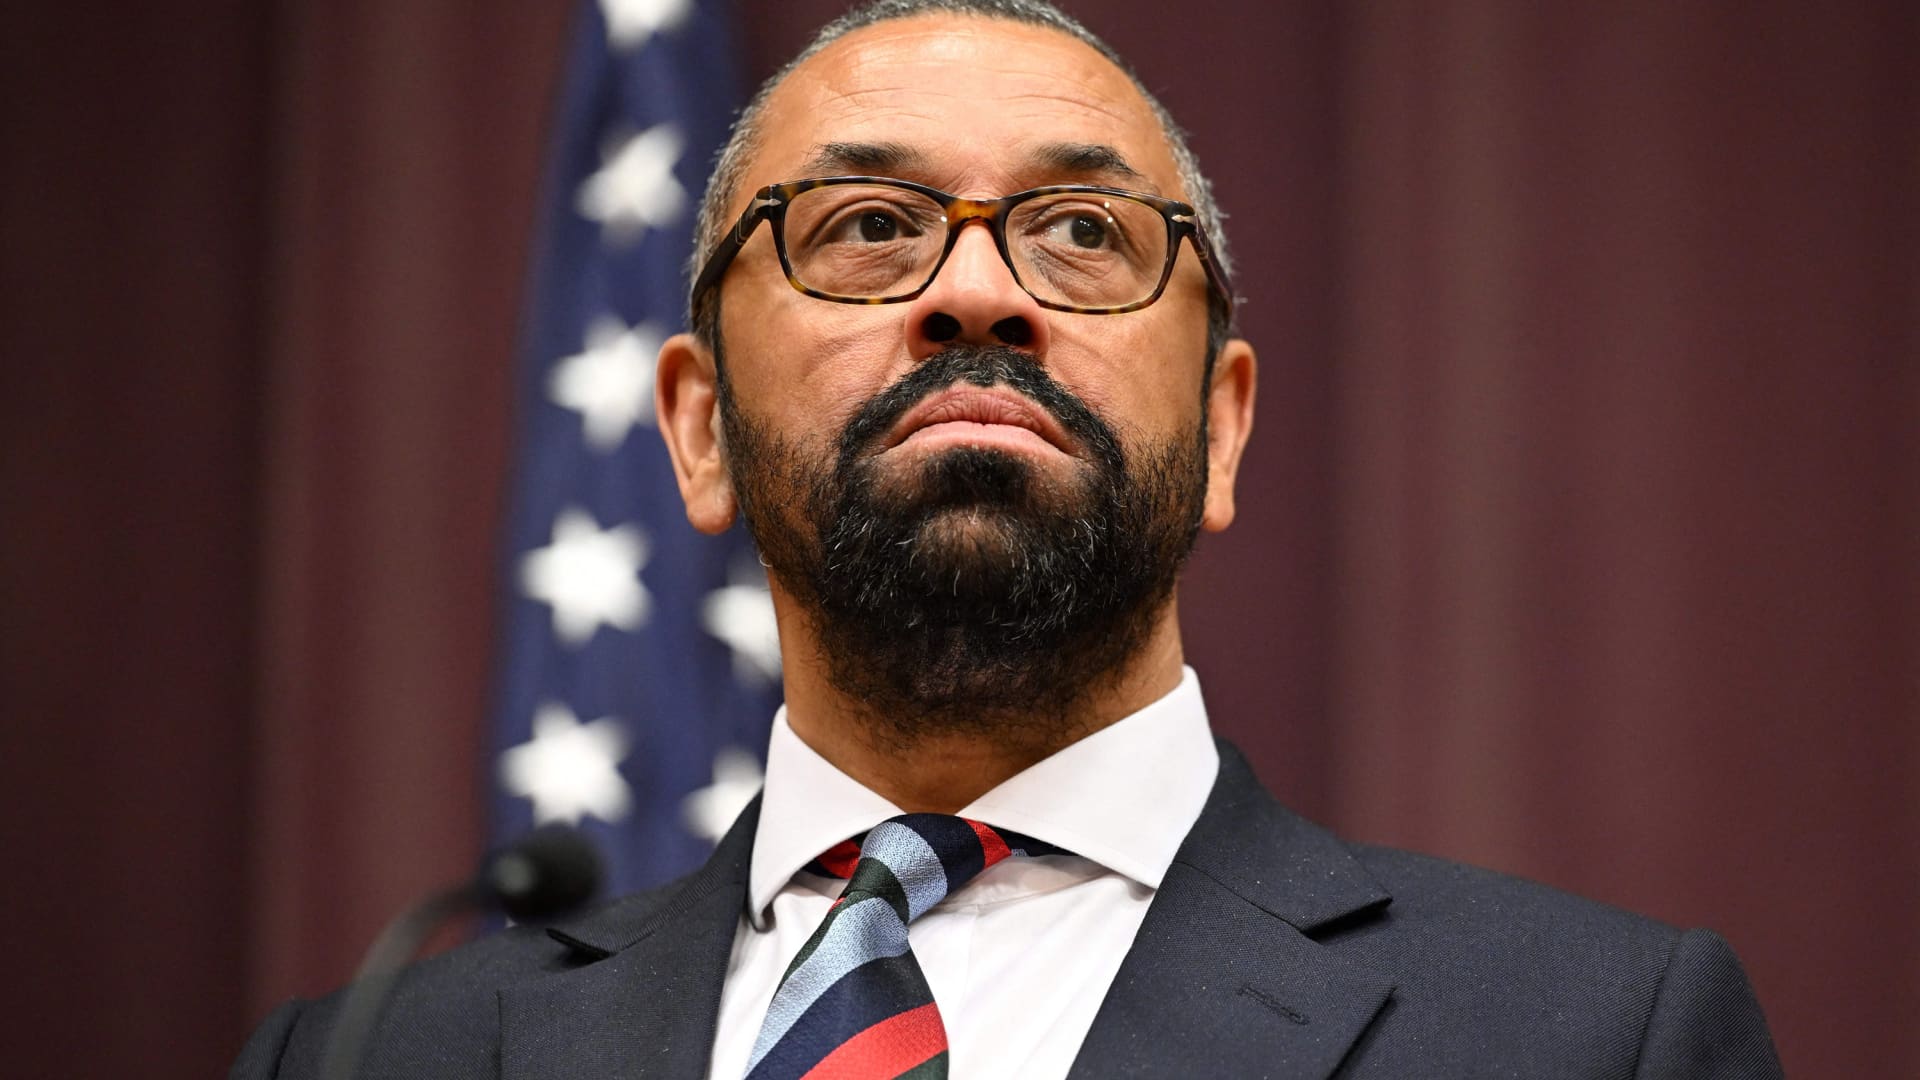 U.K. Foreign Secretary James Cleverly looks on during a joint press conference with U.S. Secretary of State Antony Blinken at the State Department in Washington, D.C., on May 9, 2023.